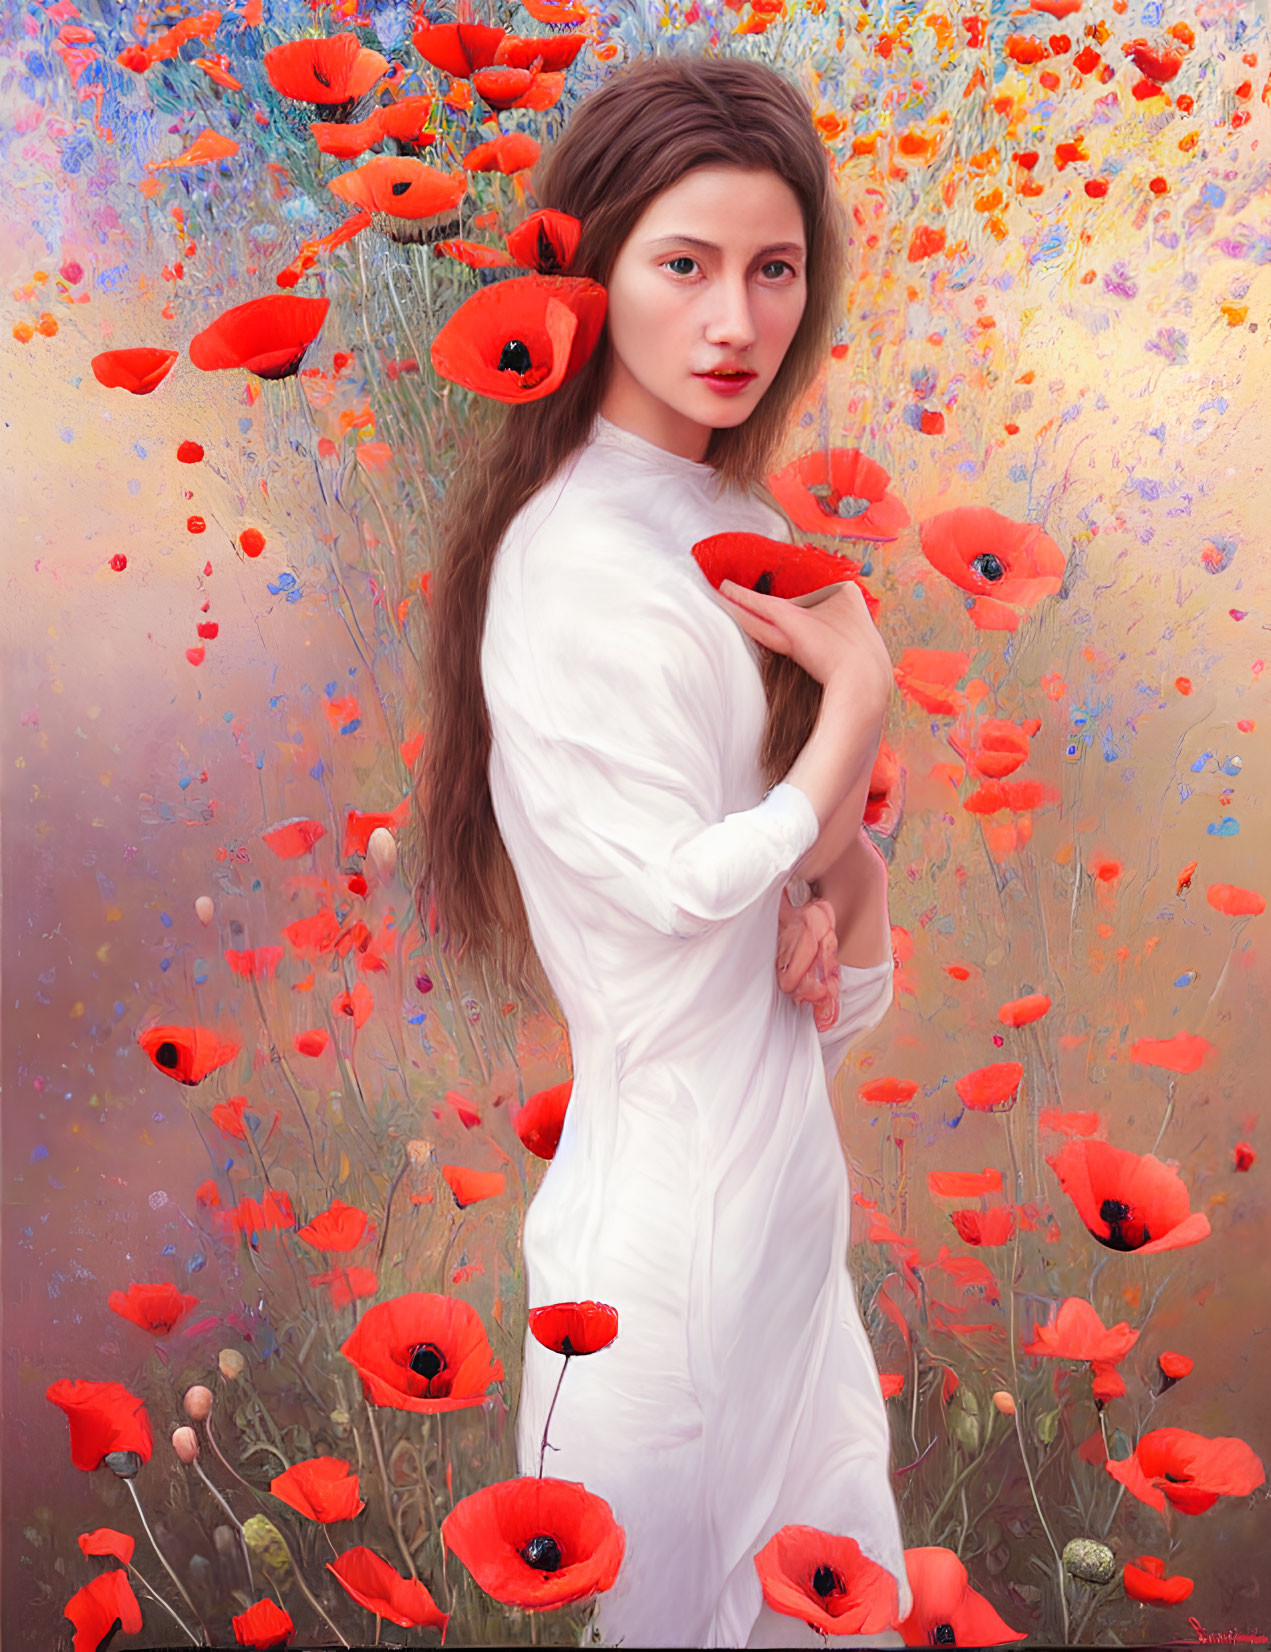 Woman in white dress surrounded by red poppies in vibrant field